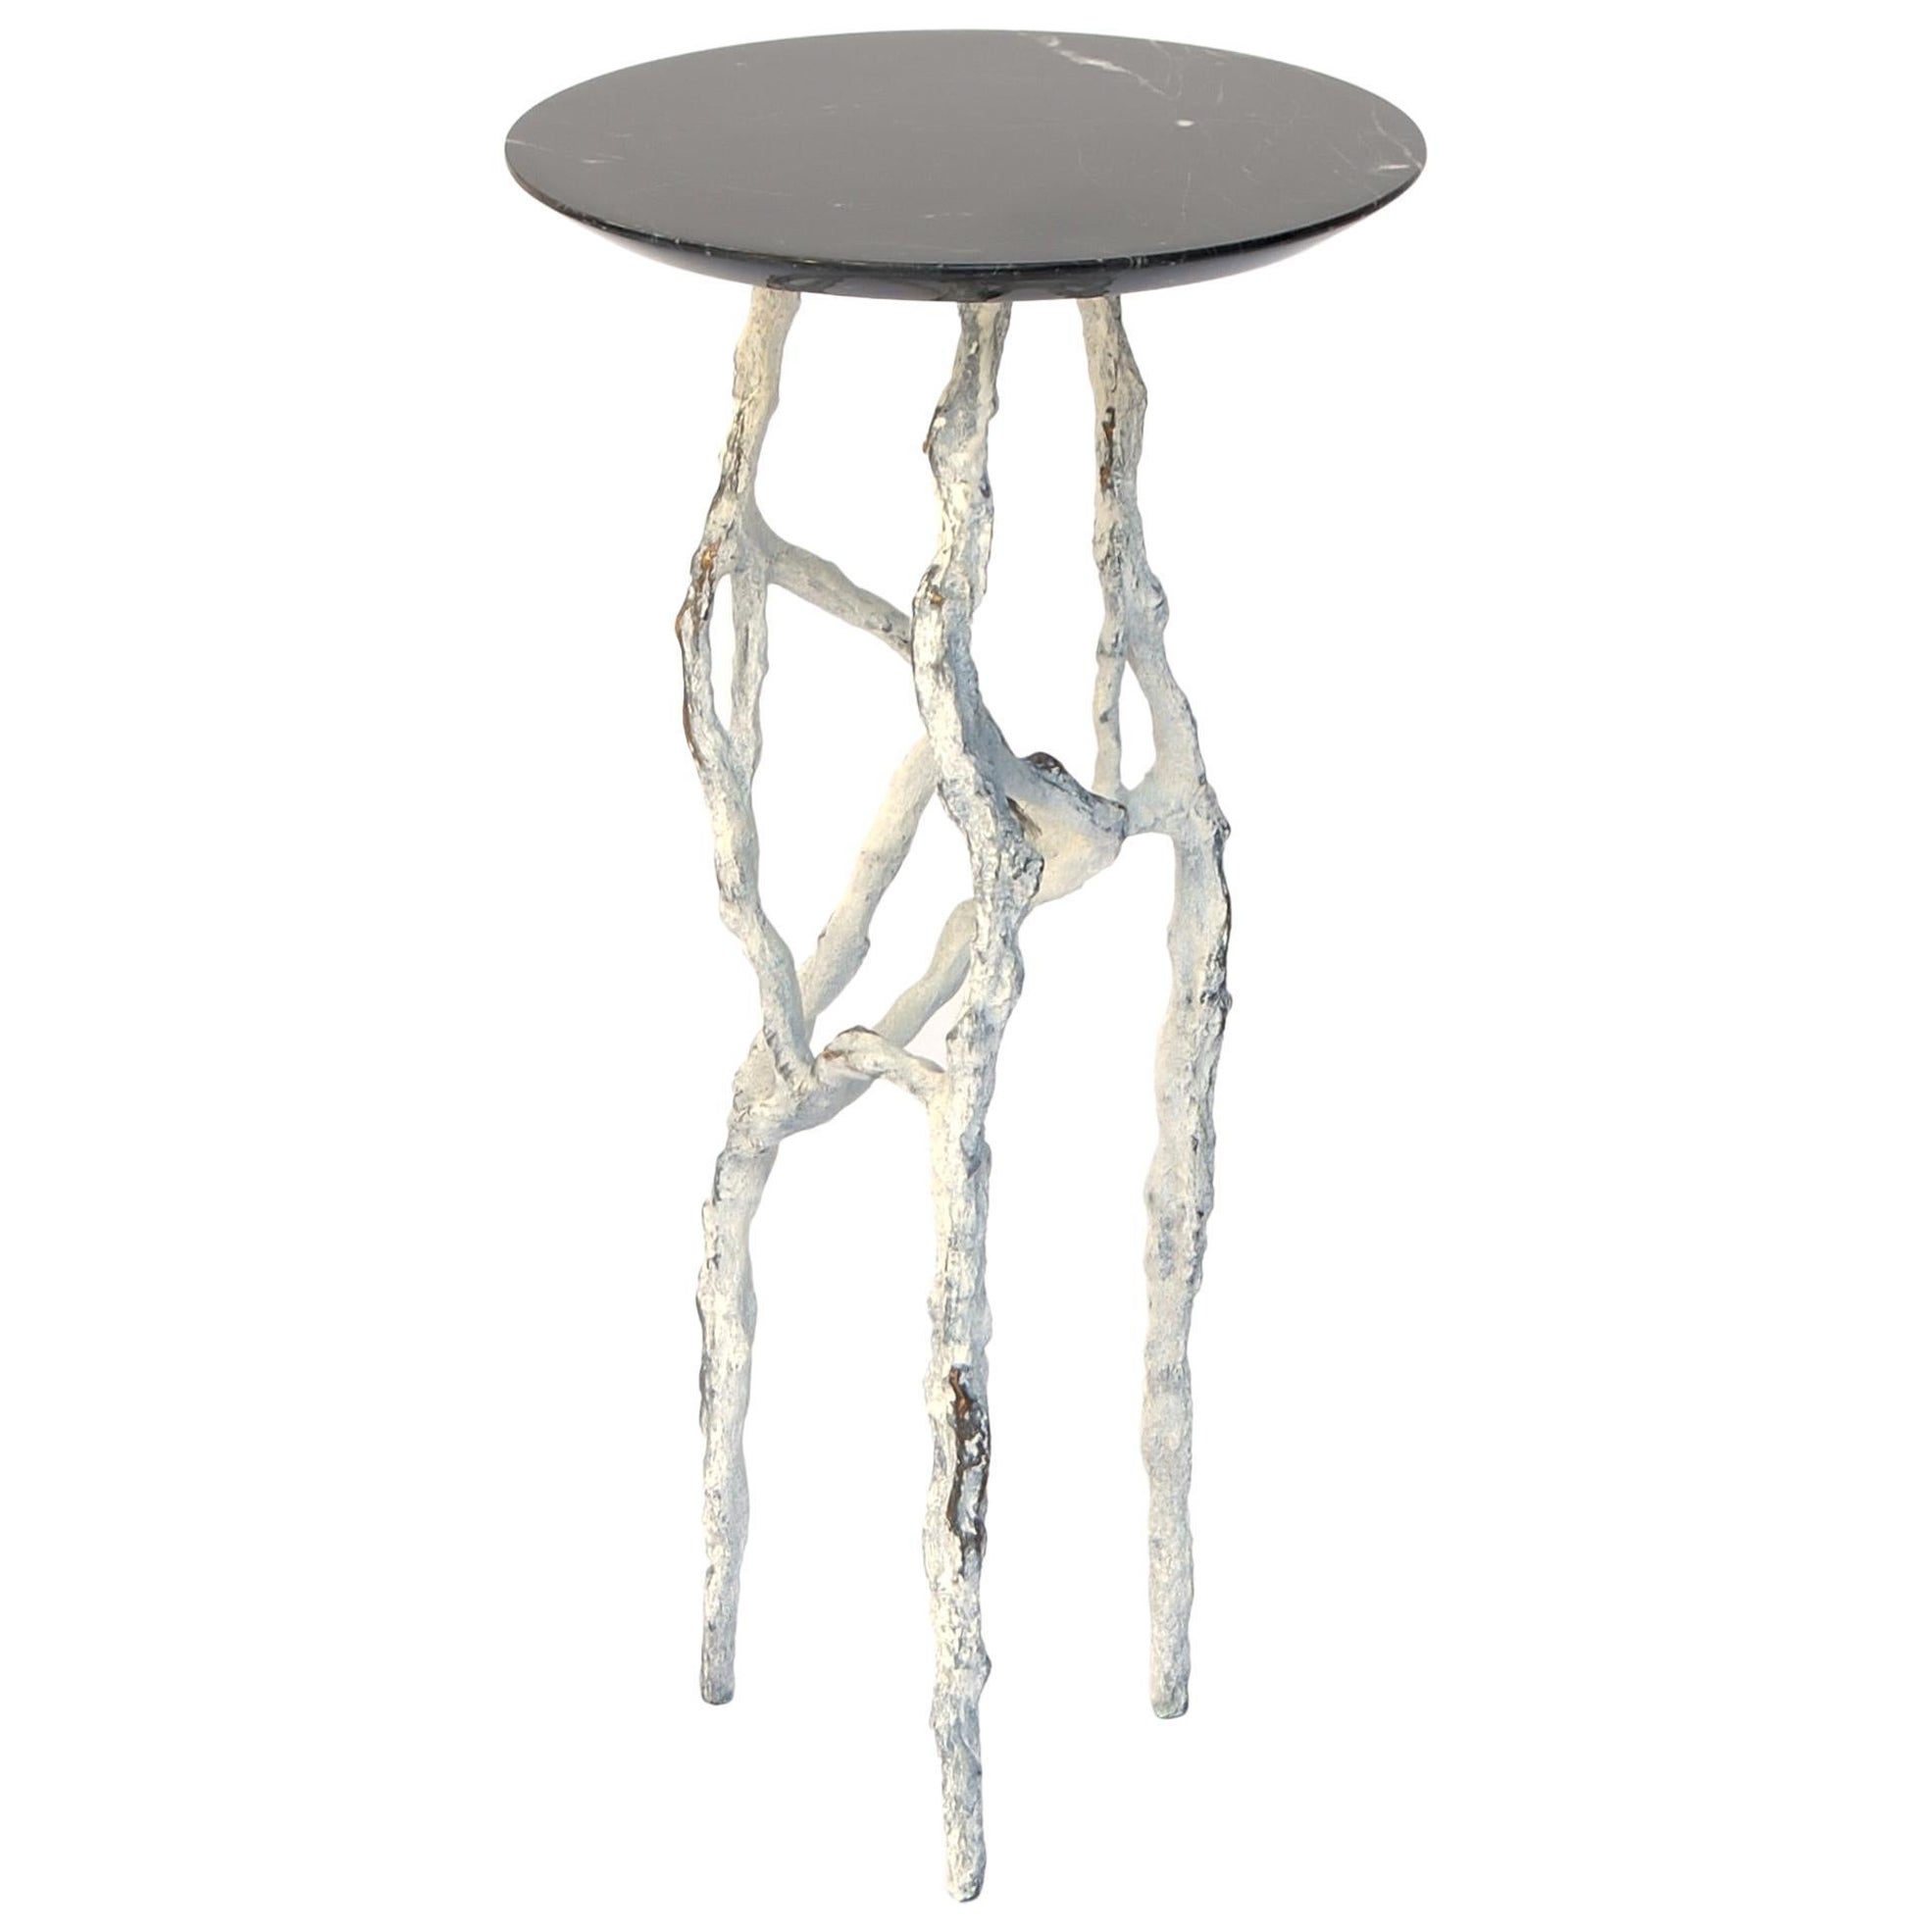 Alexia 3 Drink Table with Nero Marquina Marble Top by Fakasaka Design